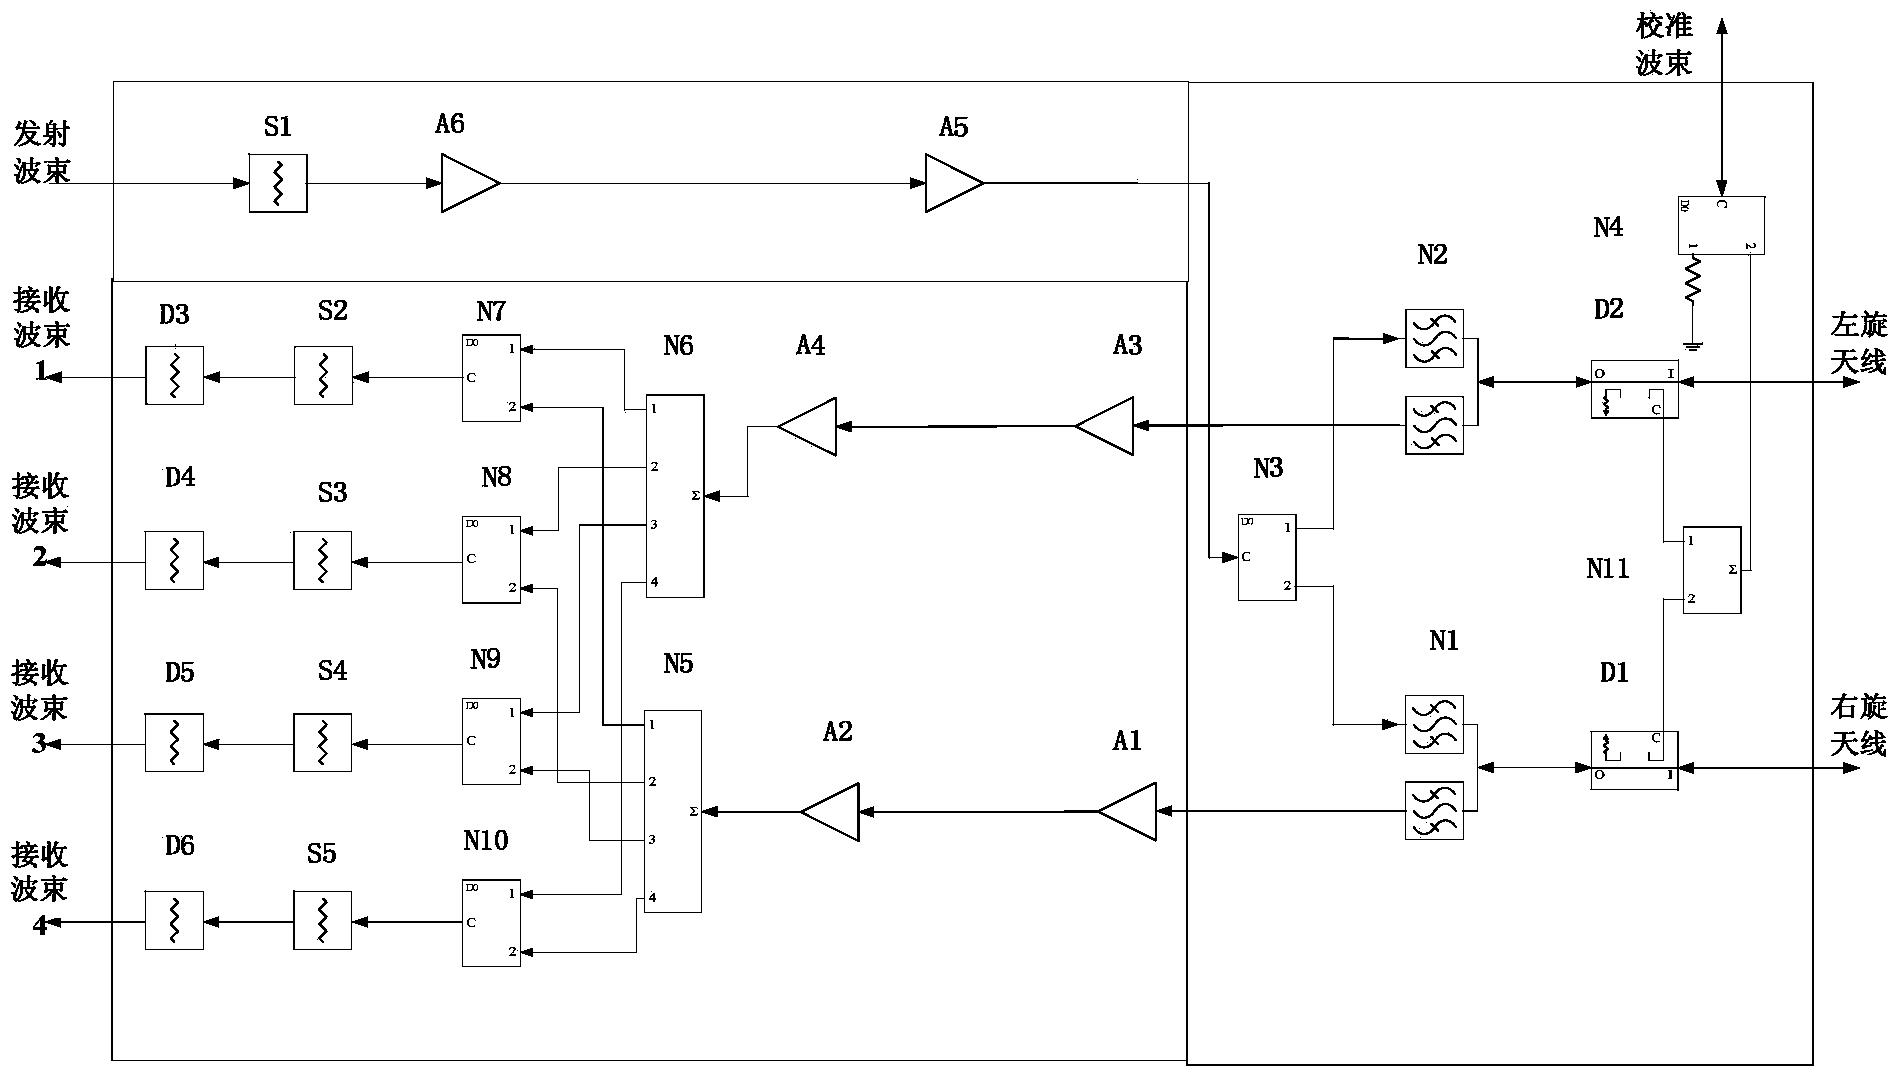 Eight-unit T/R (transmitting/receiving) basic module with function of S-band multi-beam transceiving duplexing